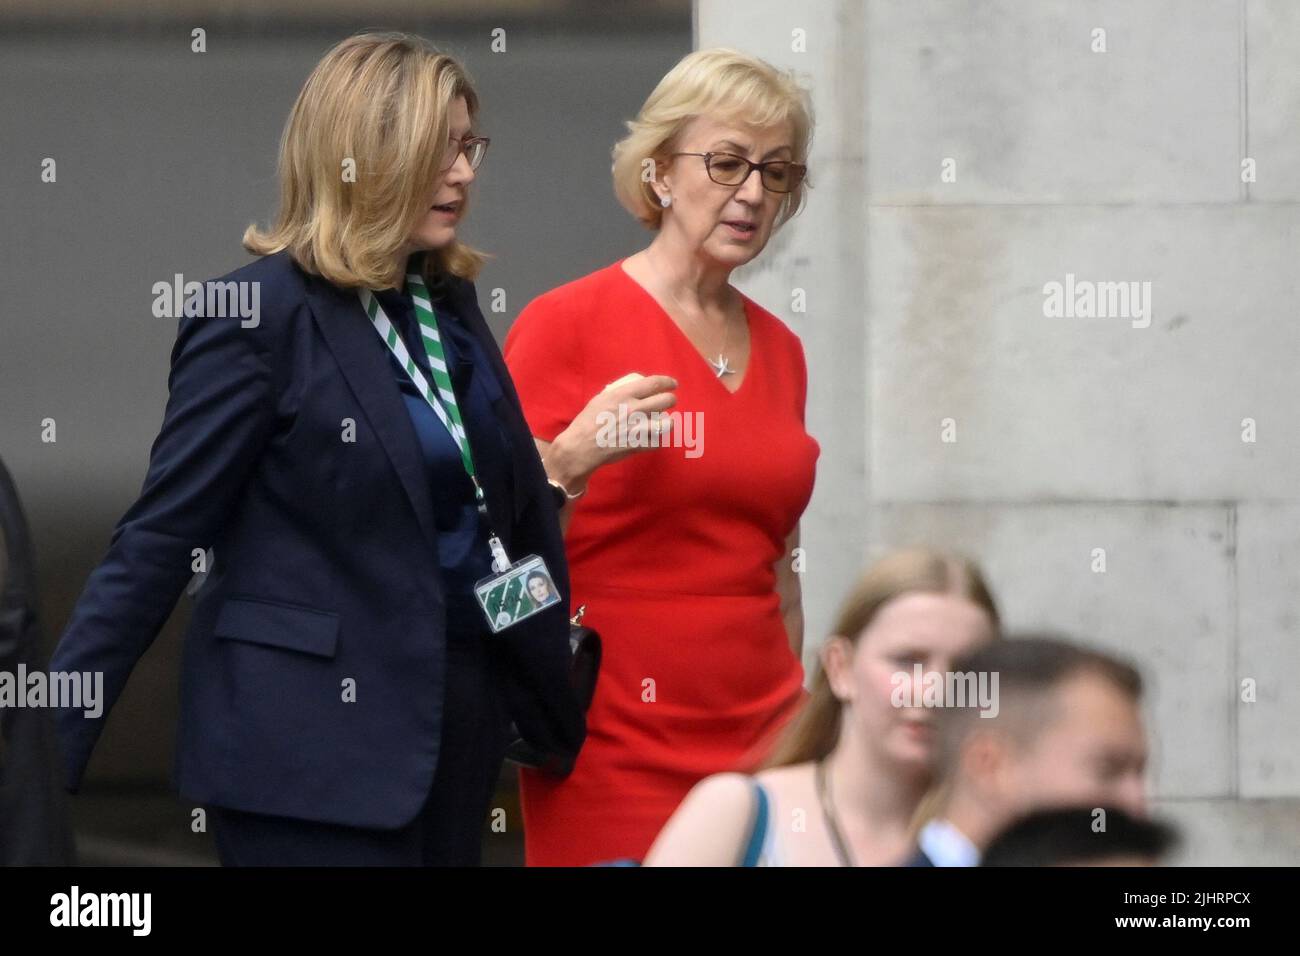 British Minister of State at the Department for International Trade Penny Mordaunt walks with Andrea Leadsom near the houses of Parliament, in London, Britain, July 20, 2022. REUTERS/Toby Melville Stock Photo